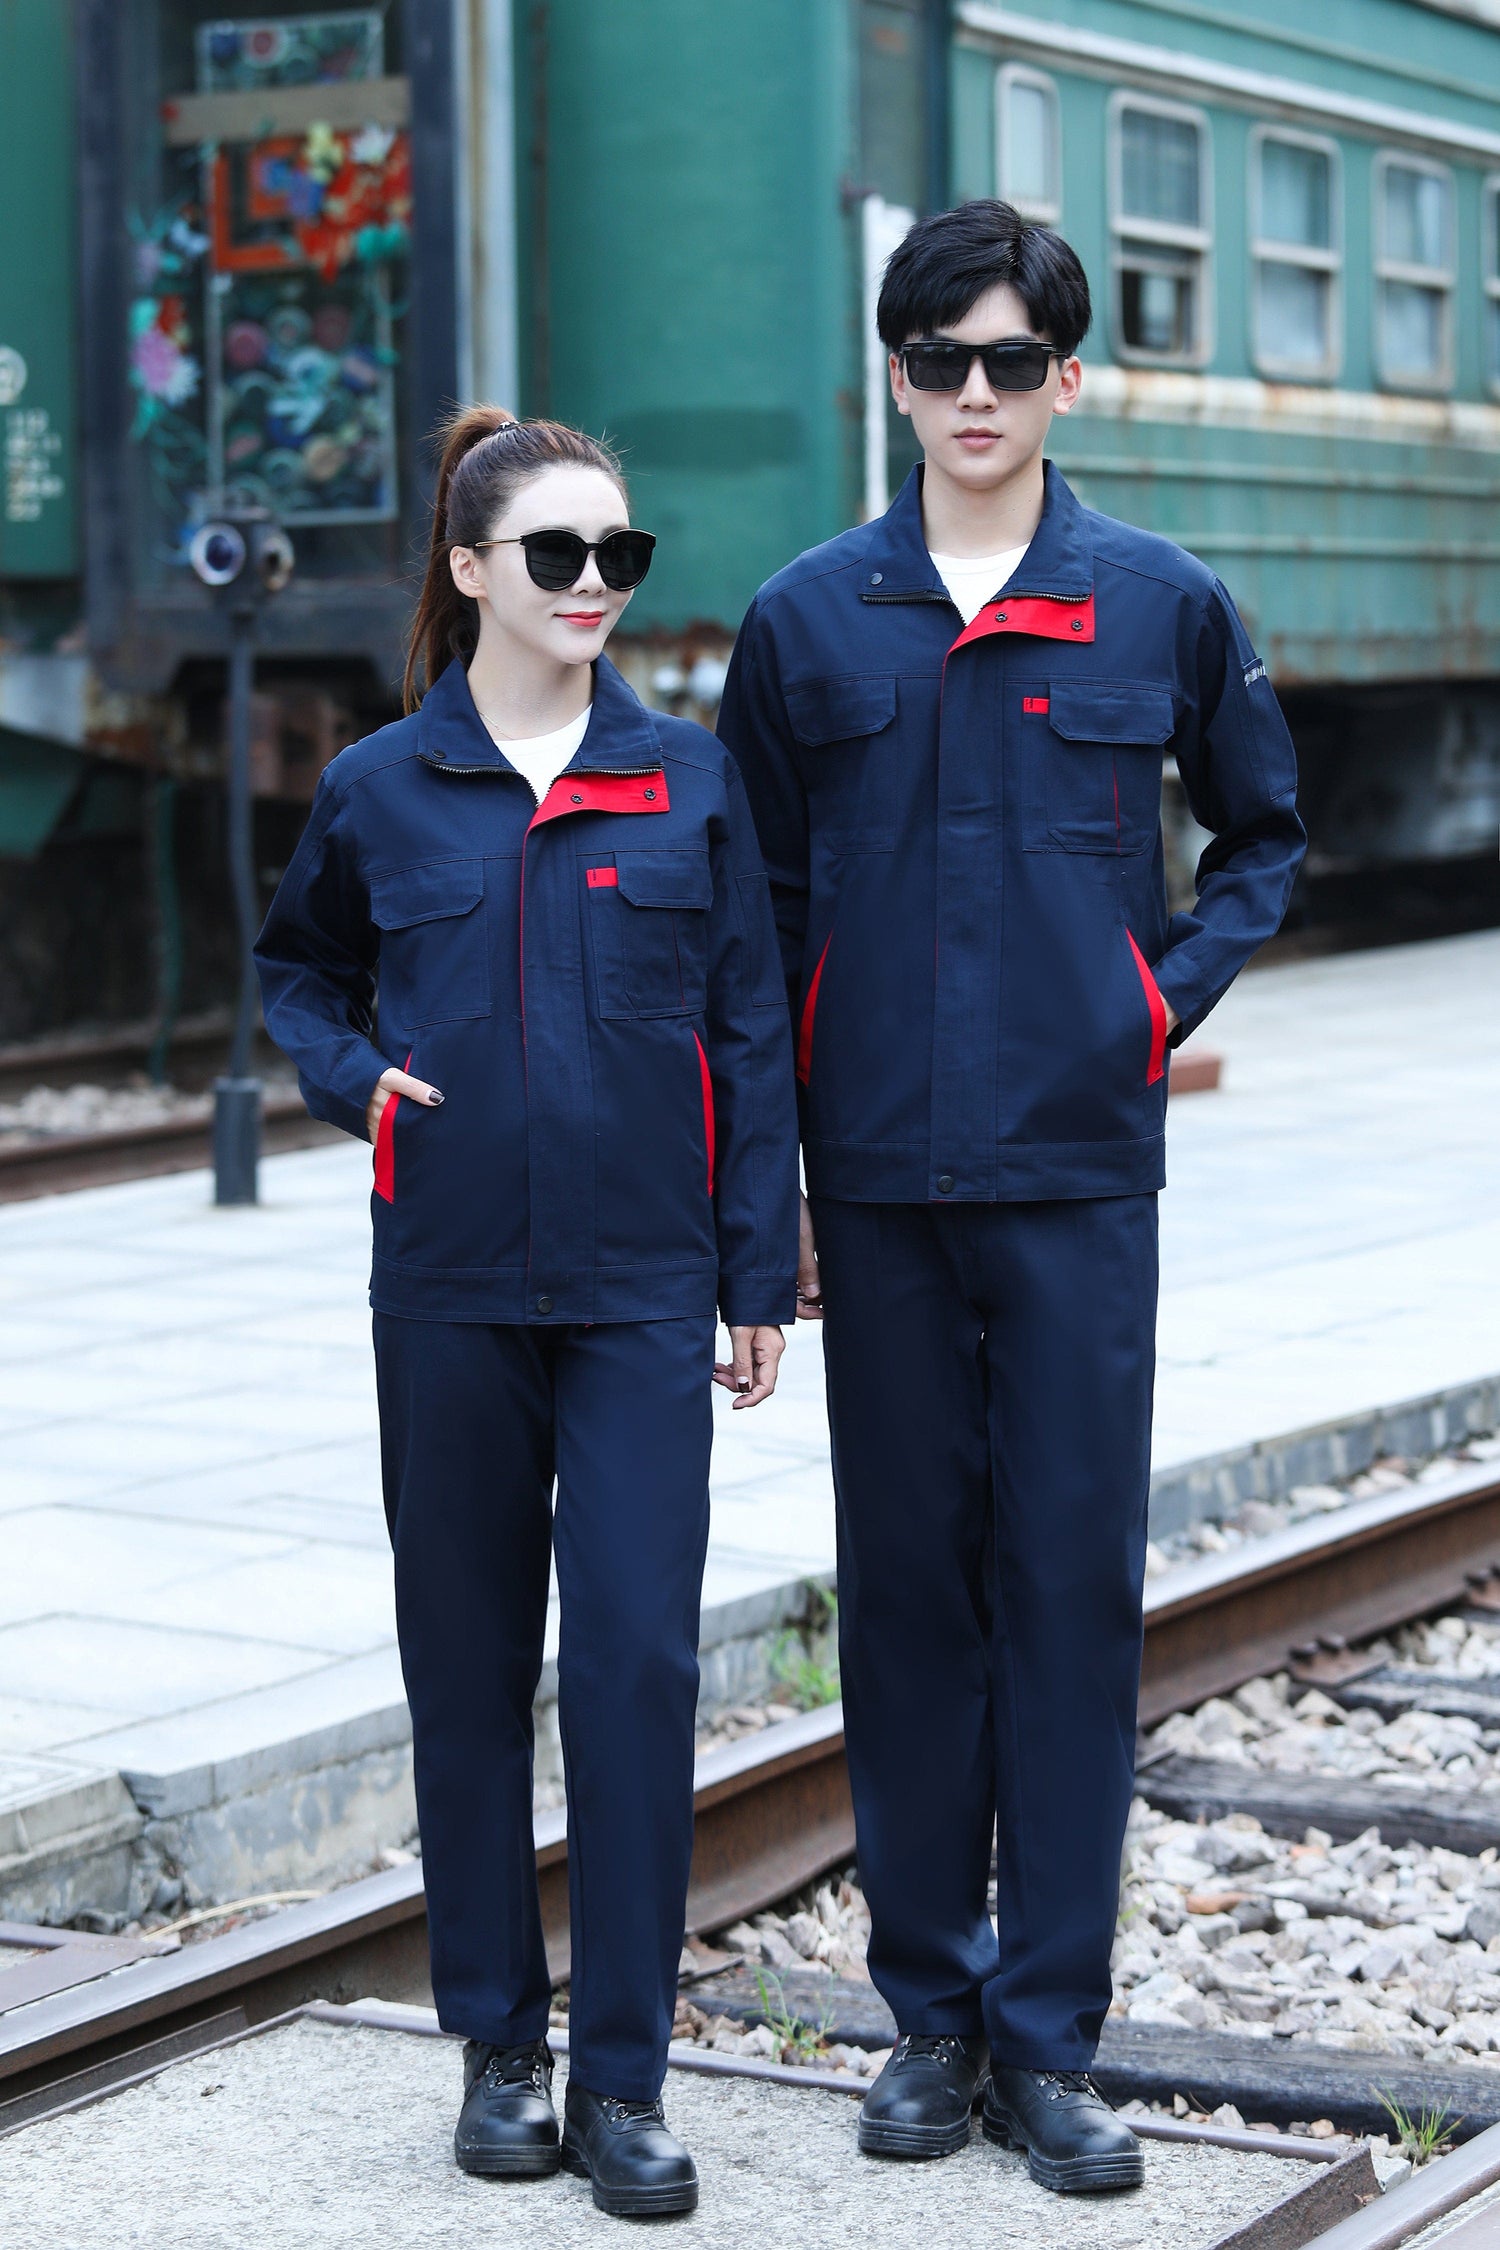 Corals Trading Co. 可樂思百貨商行 纯棉 Autumn and winter long-sleeved pure cotton series workwear SD-PC-W802